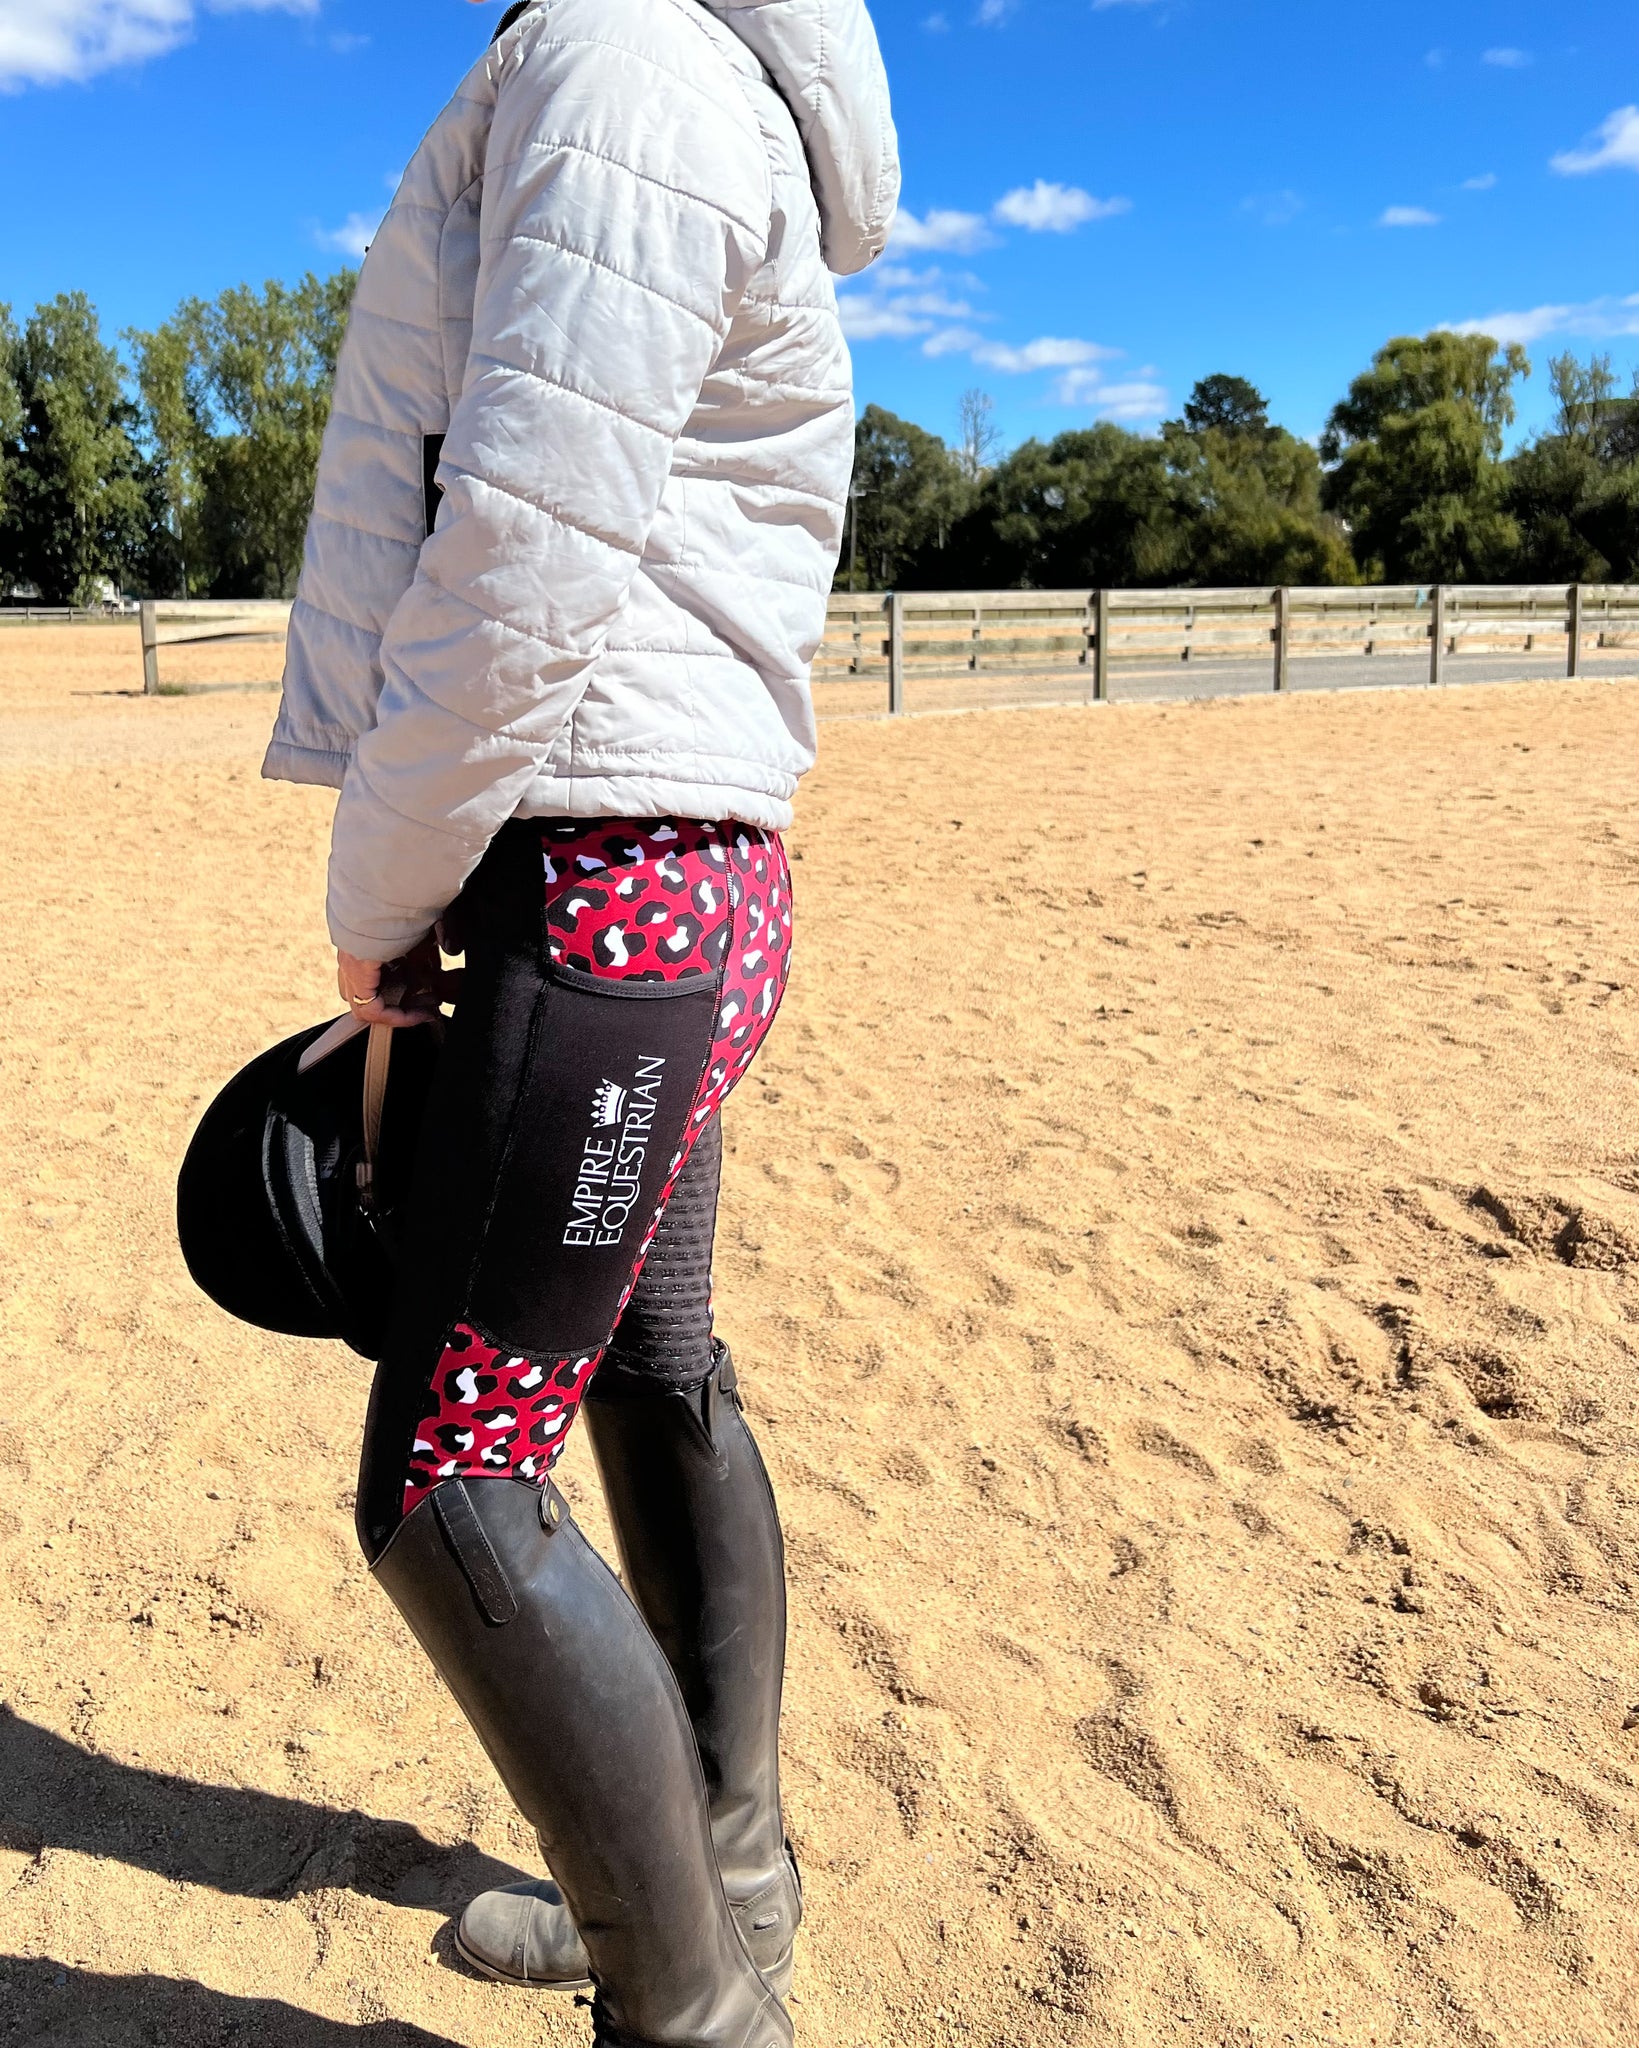 Thermal Fleece Lined Riding Tights - EEYORE – Empire Equestrian